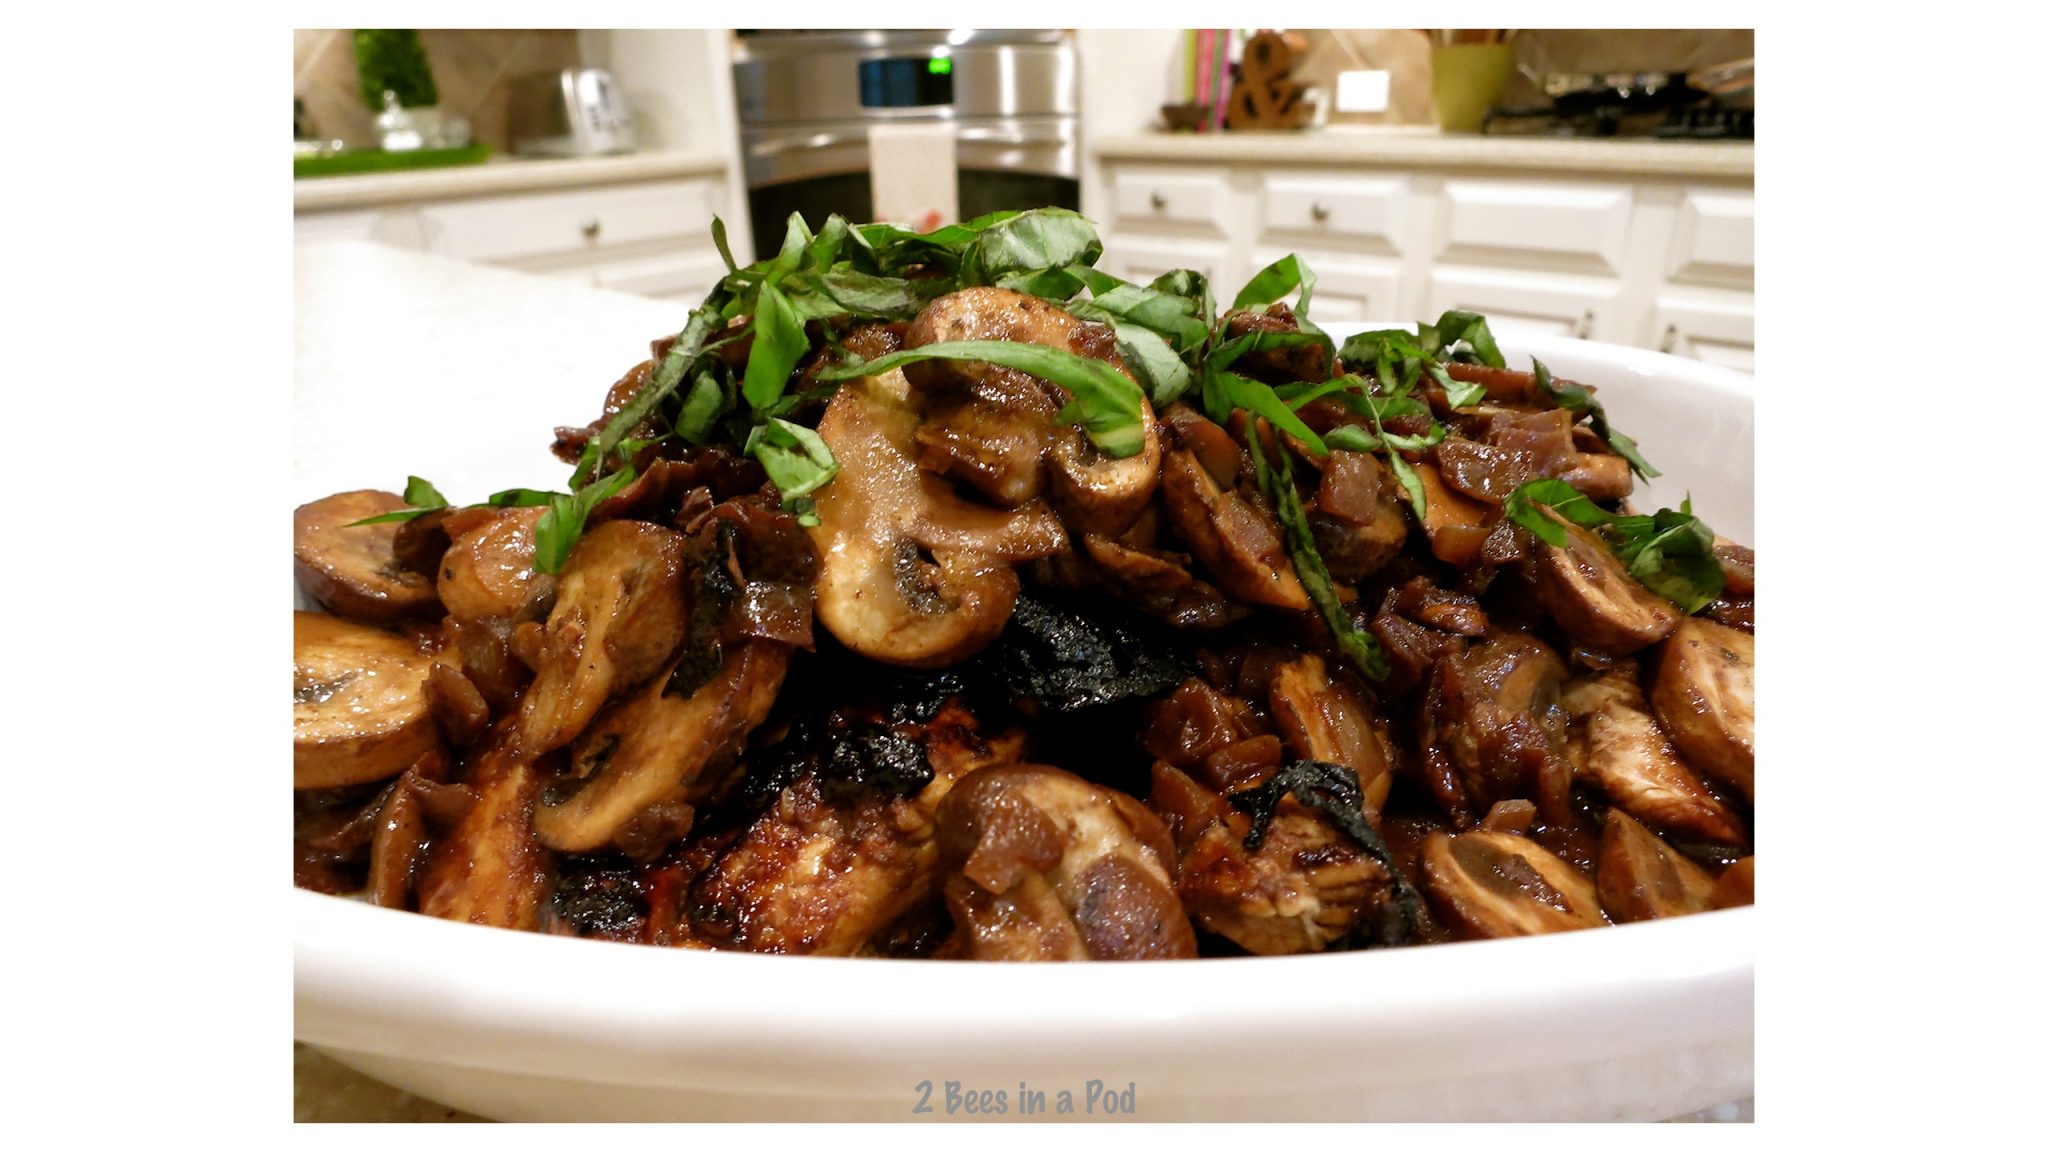 Doesn't this Weight Watchers Balsamic Chicken and Mushroom recipe look delicious? And so easy to make!